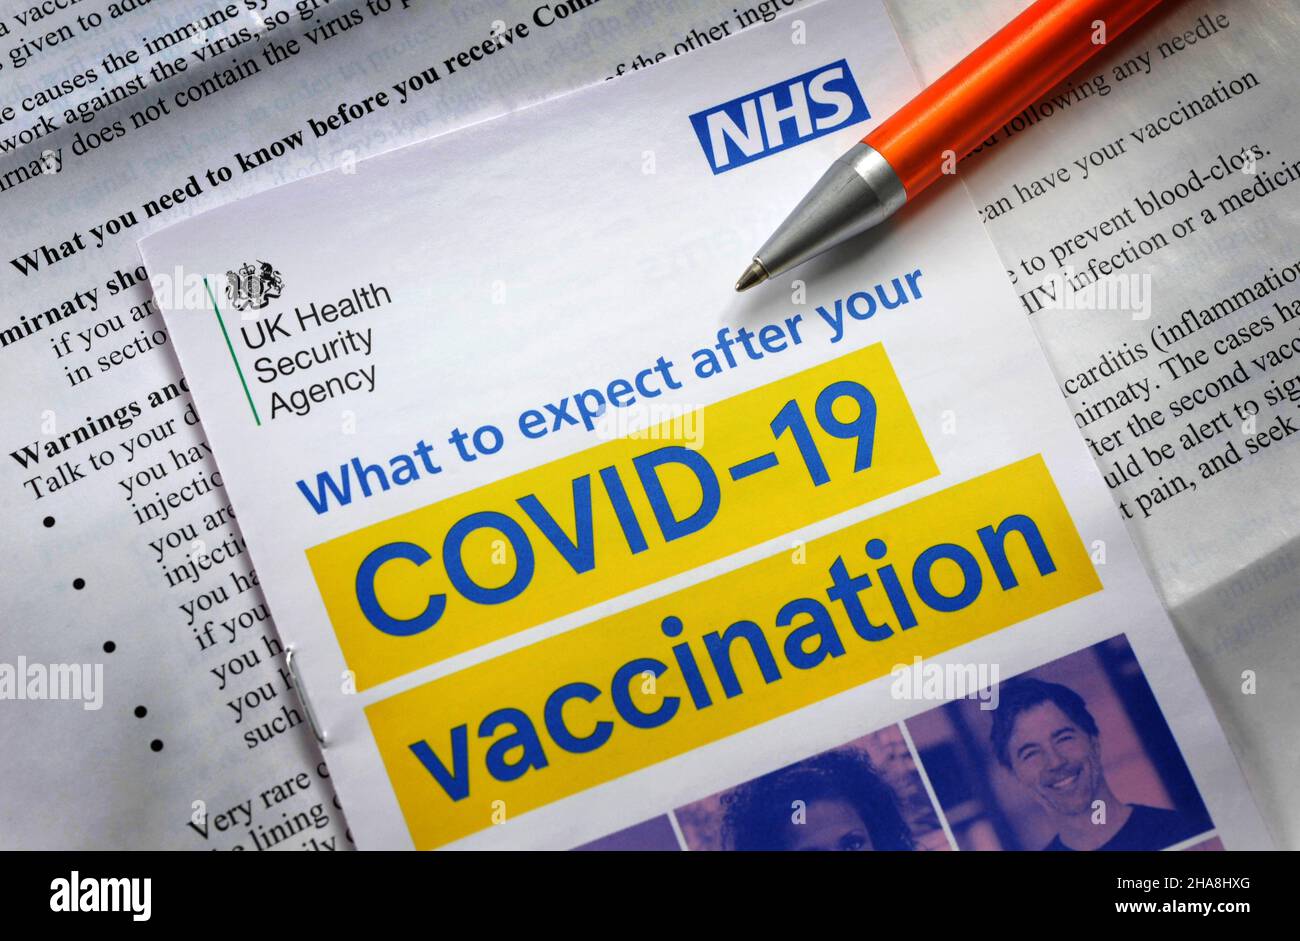 NHS COVID-19 INFORMATION LEAFLET ABOUT WHAT TO EXPECT AFTER YOUR COVID VACCINATION RE VACCINES   PANDEMIC CORONAVIRUS OMICRON ETC UK Stock Photo